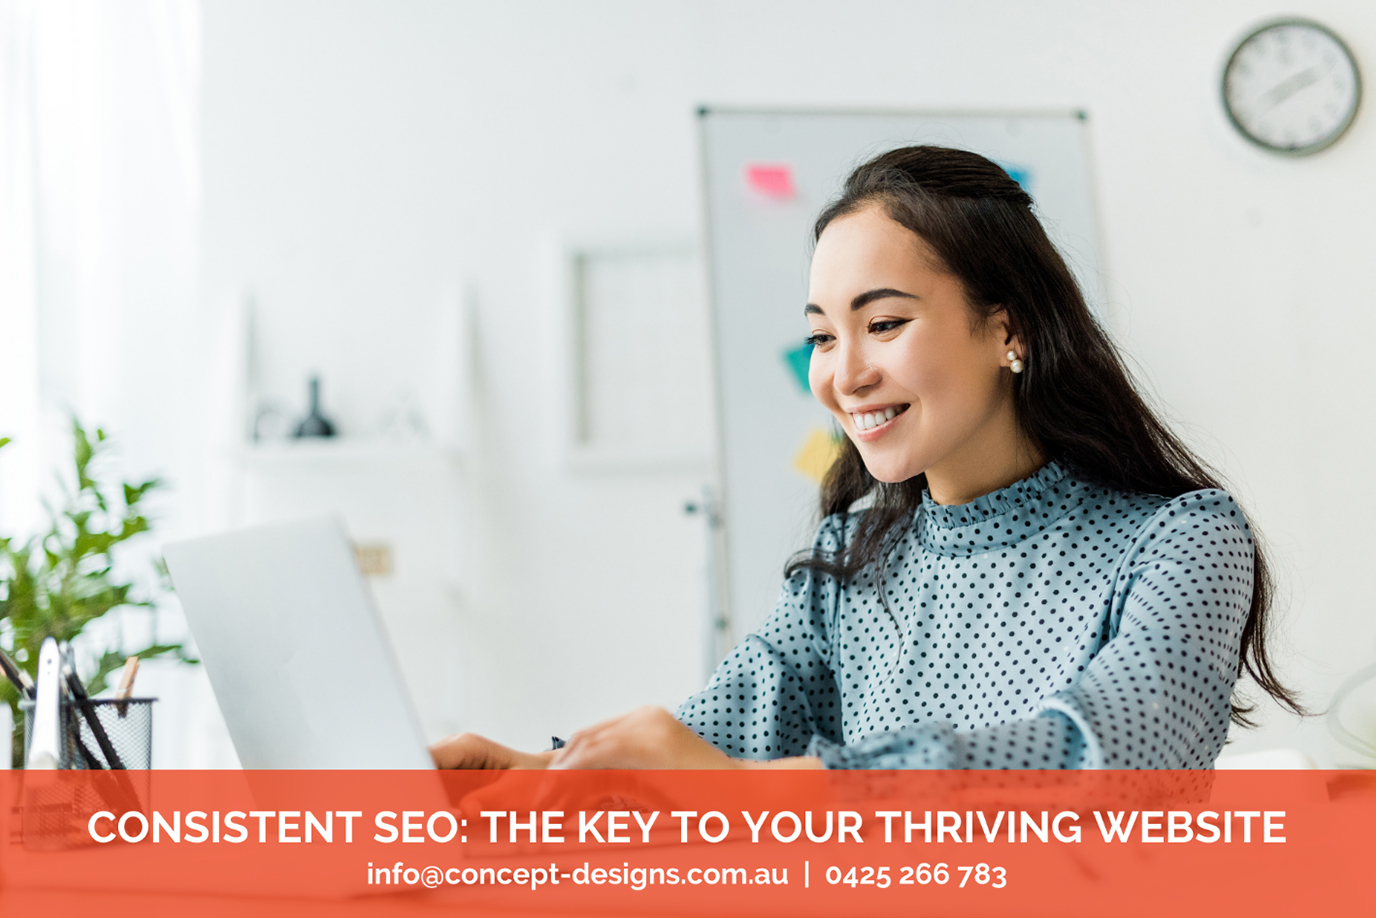 Consistent <span class="caps">SEO</span>: The Key to Your Thriving Website